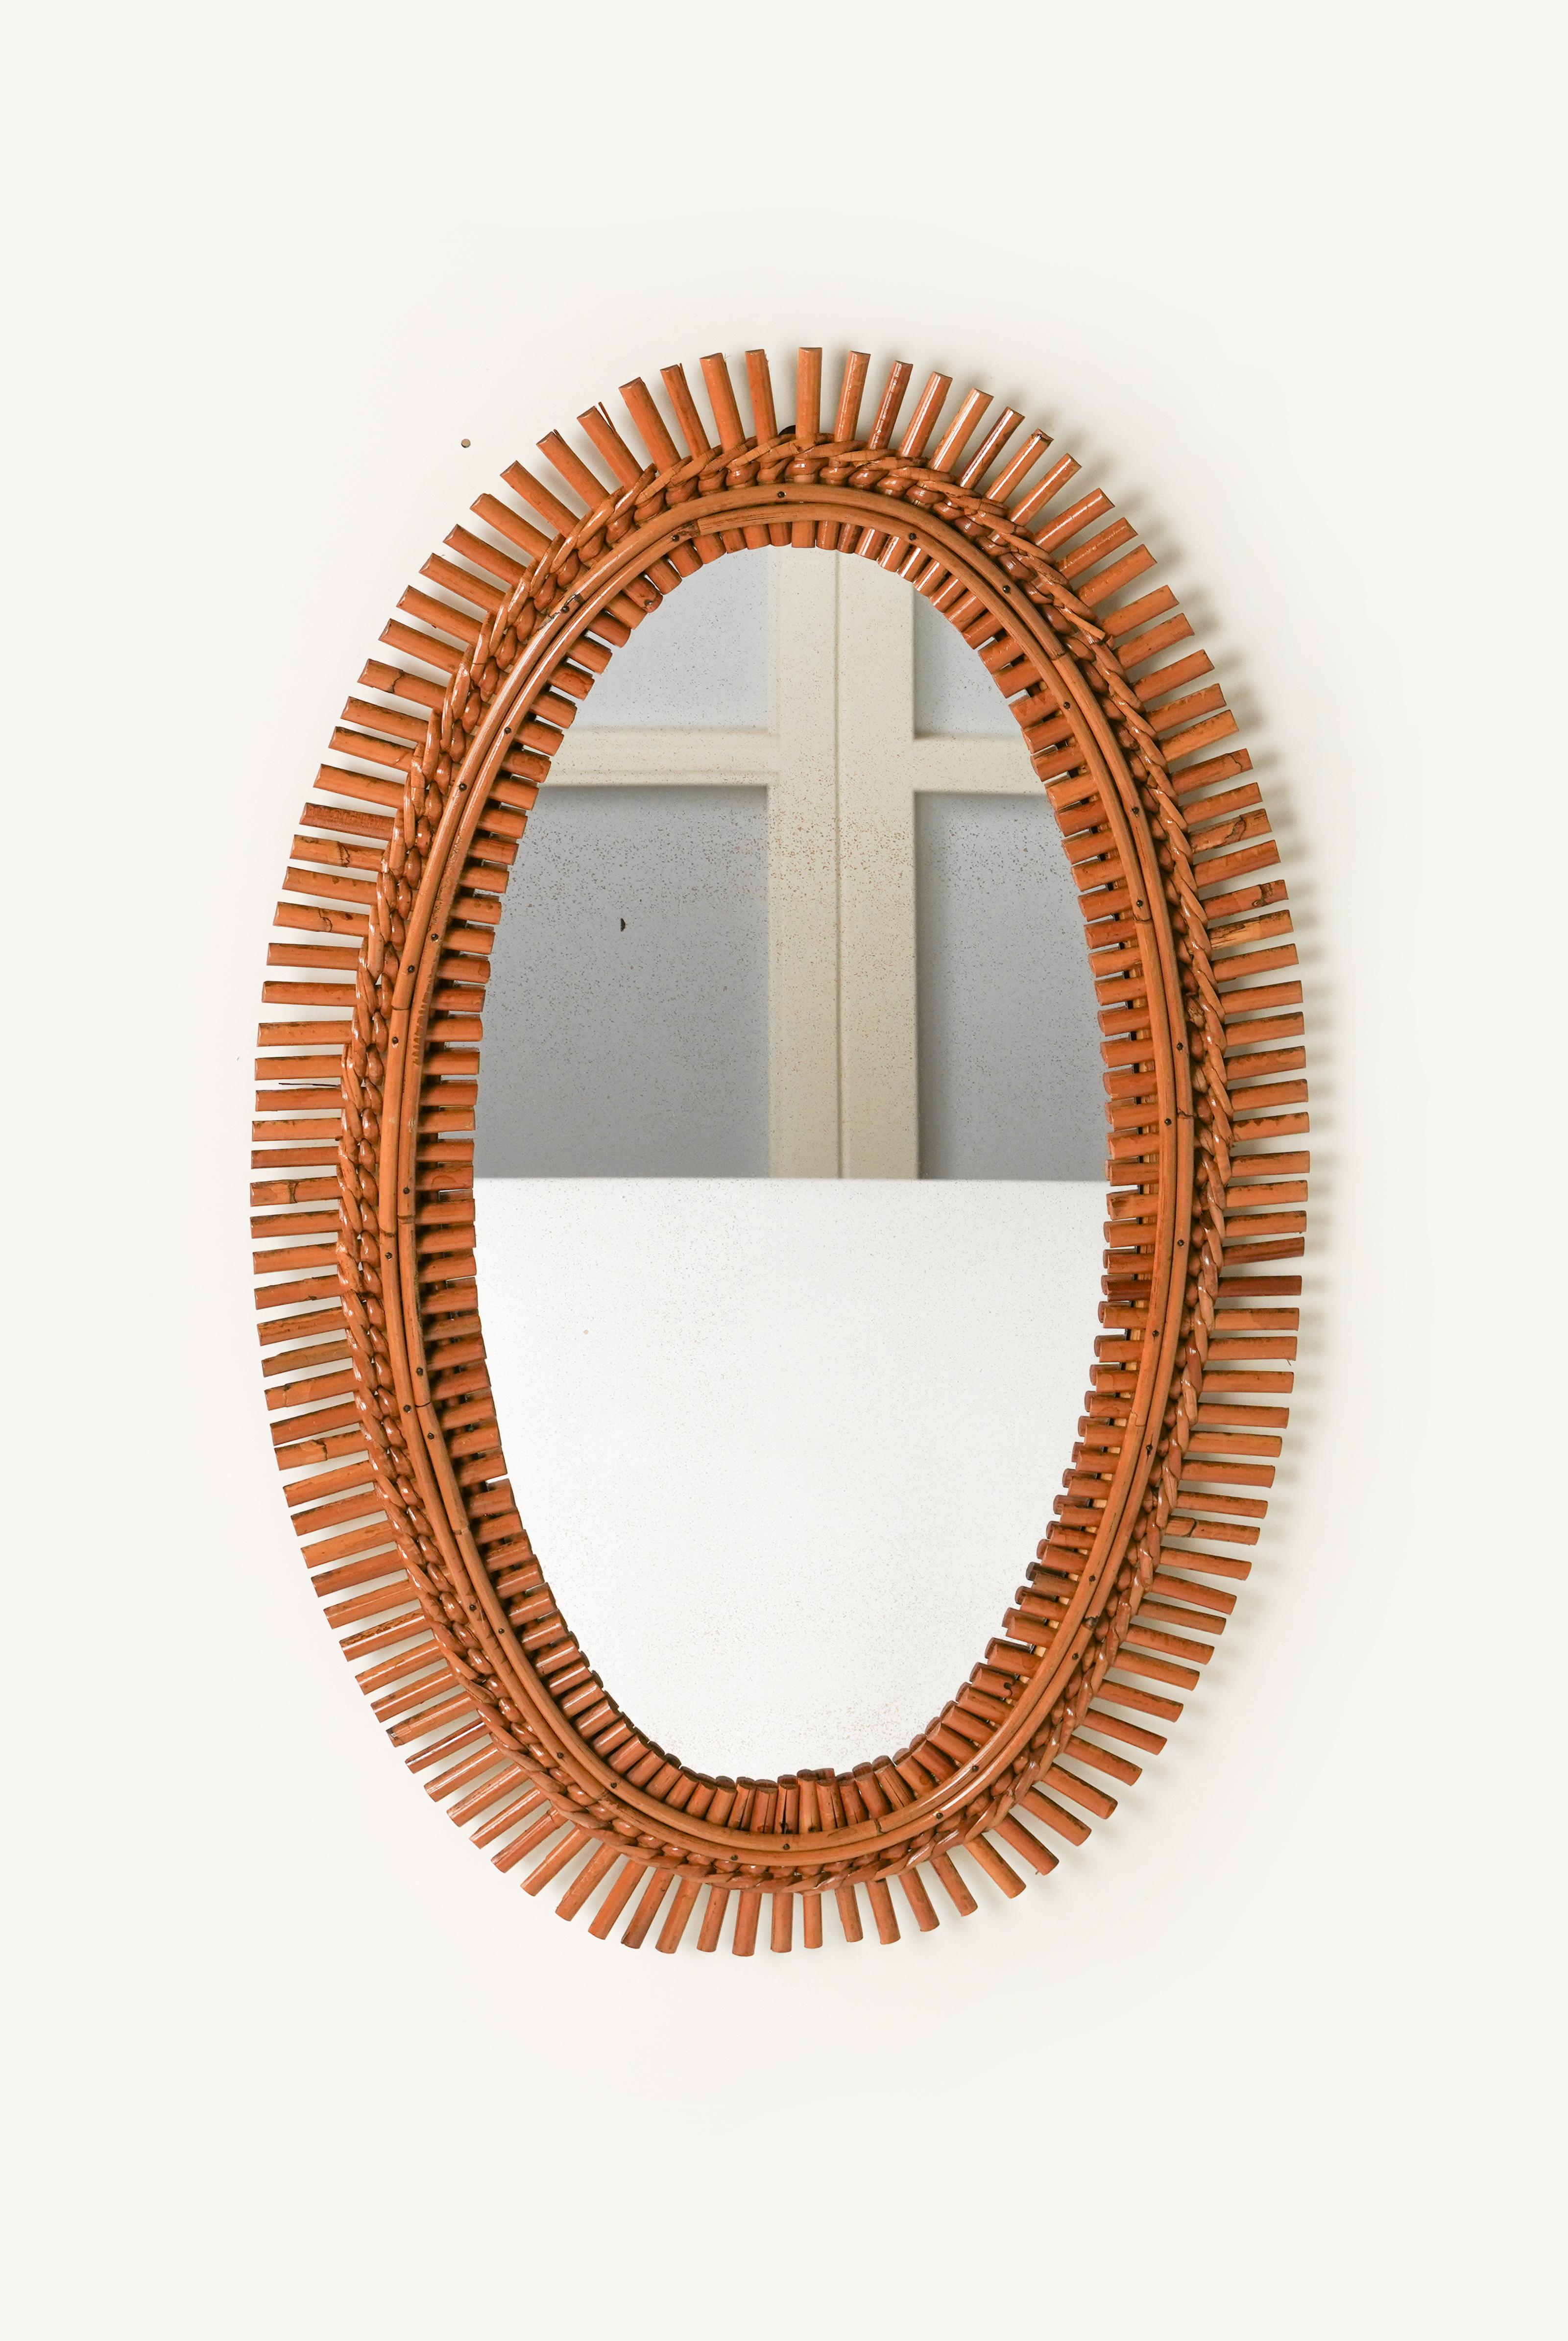 Midcentury Rattan and Bamboo Oval Wall Mirror, Italy 1960s For Sale 4